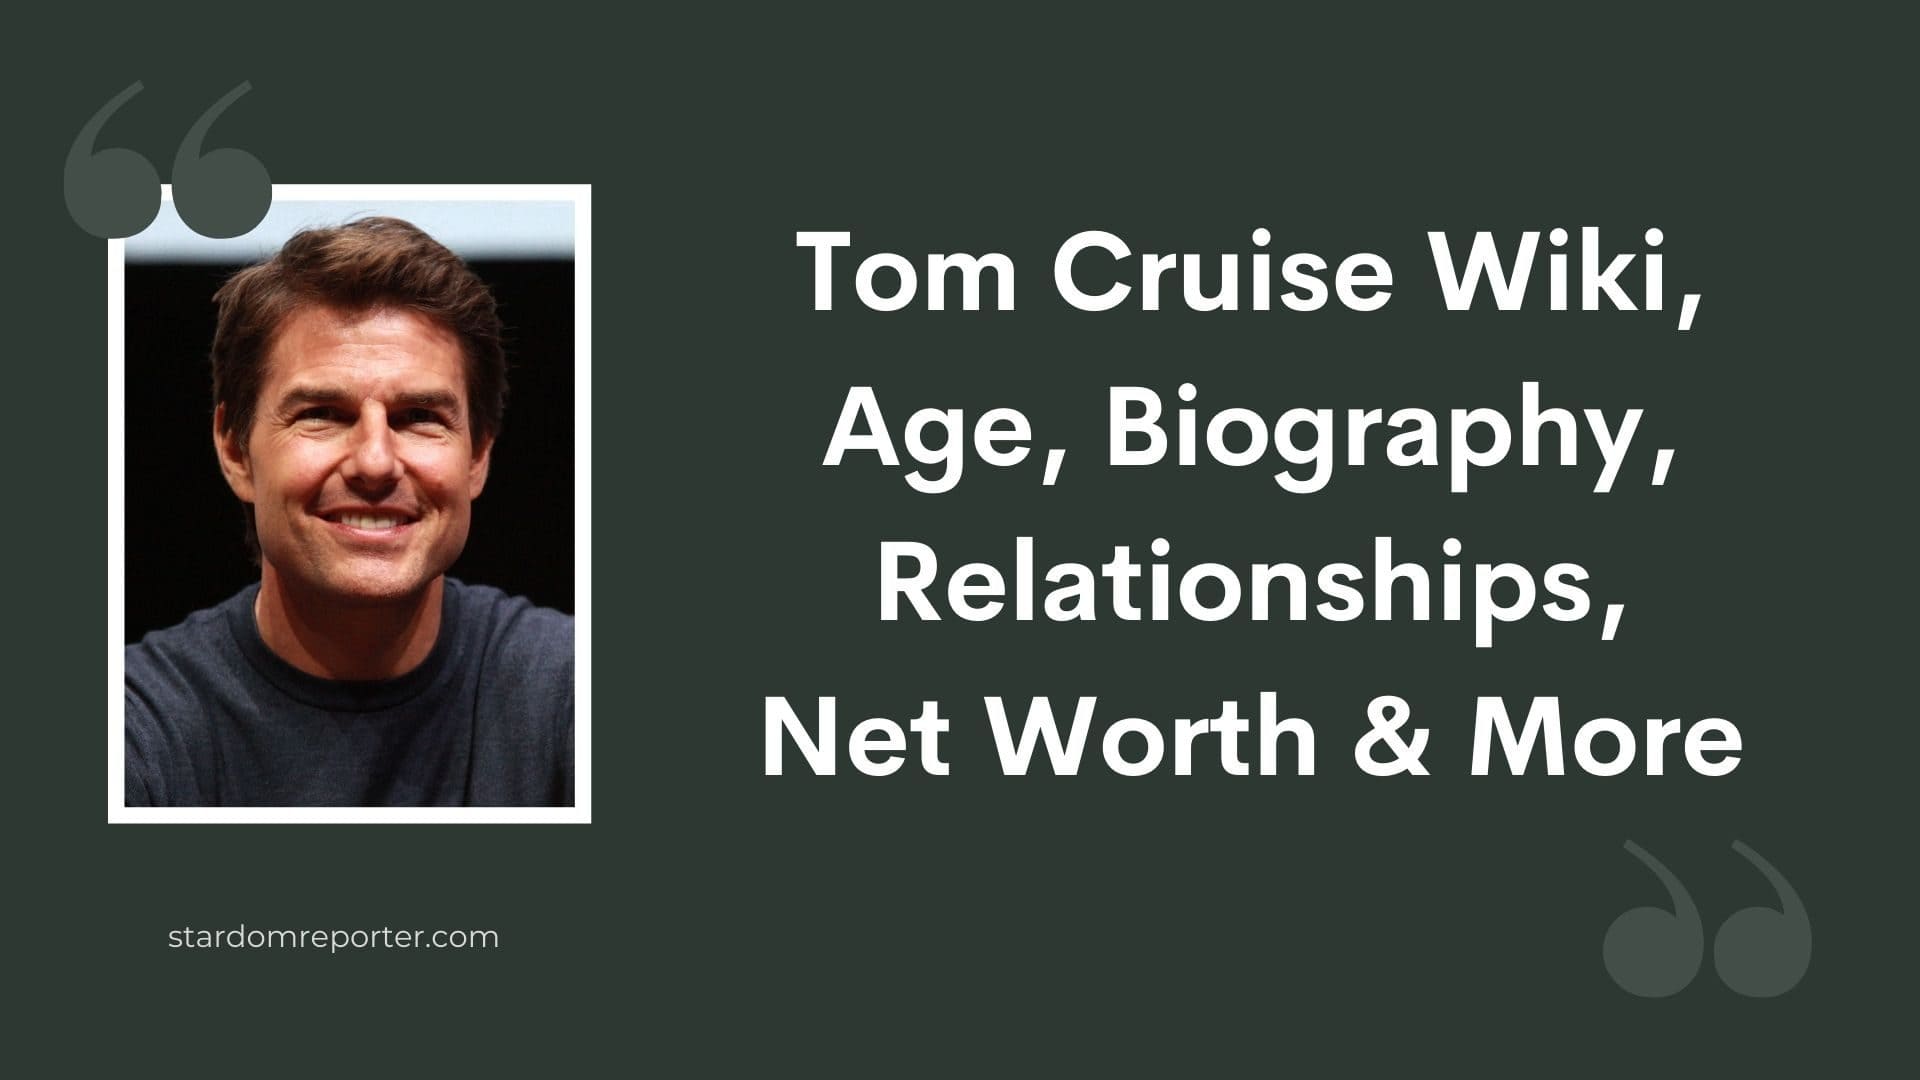 Tom Cruise Wiki, Age, Biography, Relationships, Net Worth & More - 1